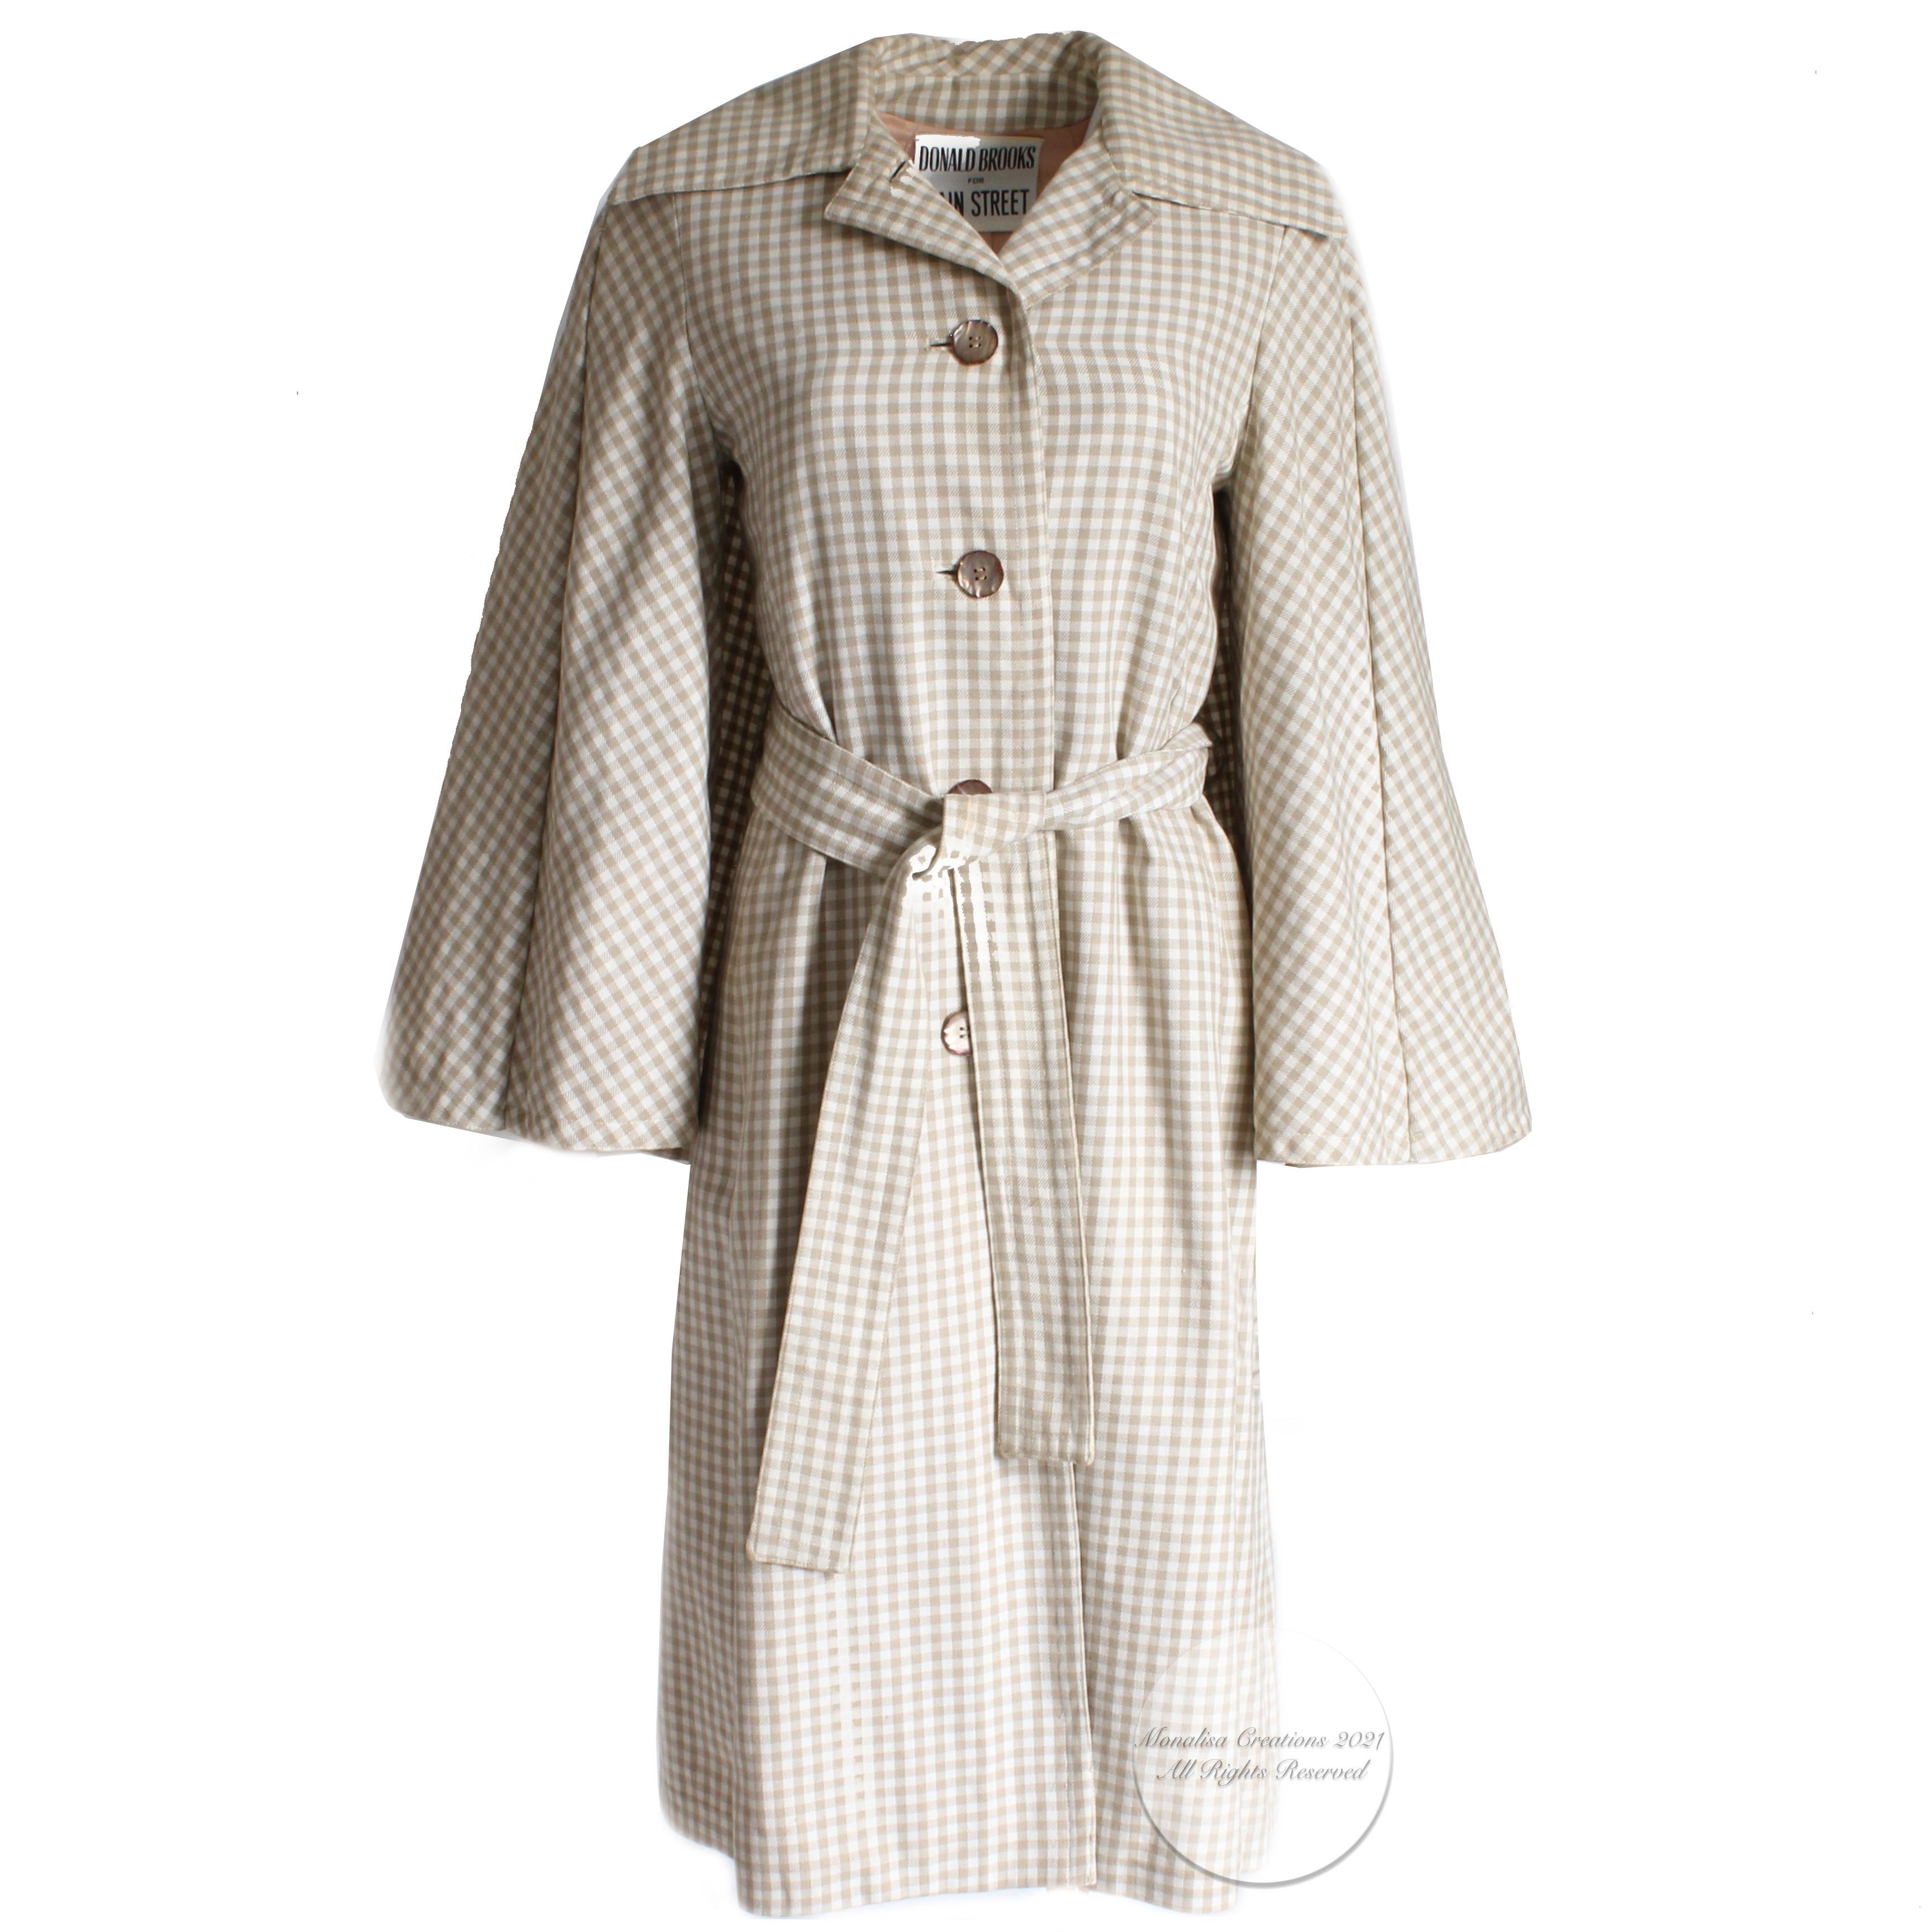 Authentic, preowned, vintage Donald Brooks trench style coat or jacket with attached caplet/cape, circa the 70s. Tan and white check fabric/coat is lined/dry clean recommended/no fabric label (feels like light wool).  Comes with detachable belt. No